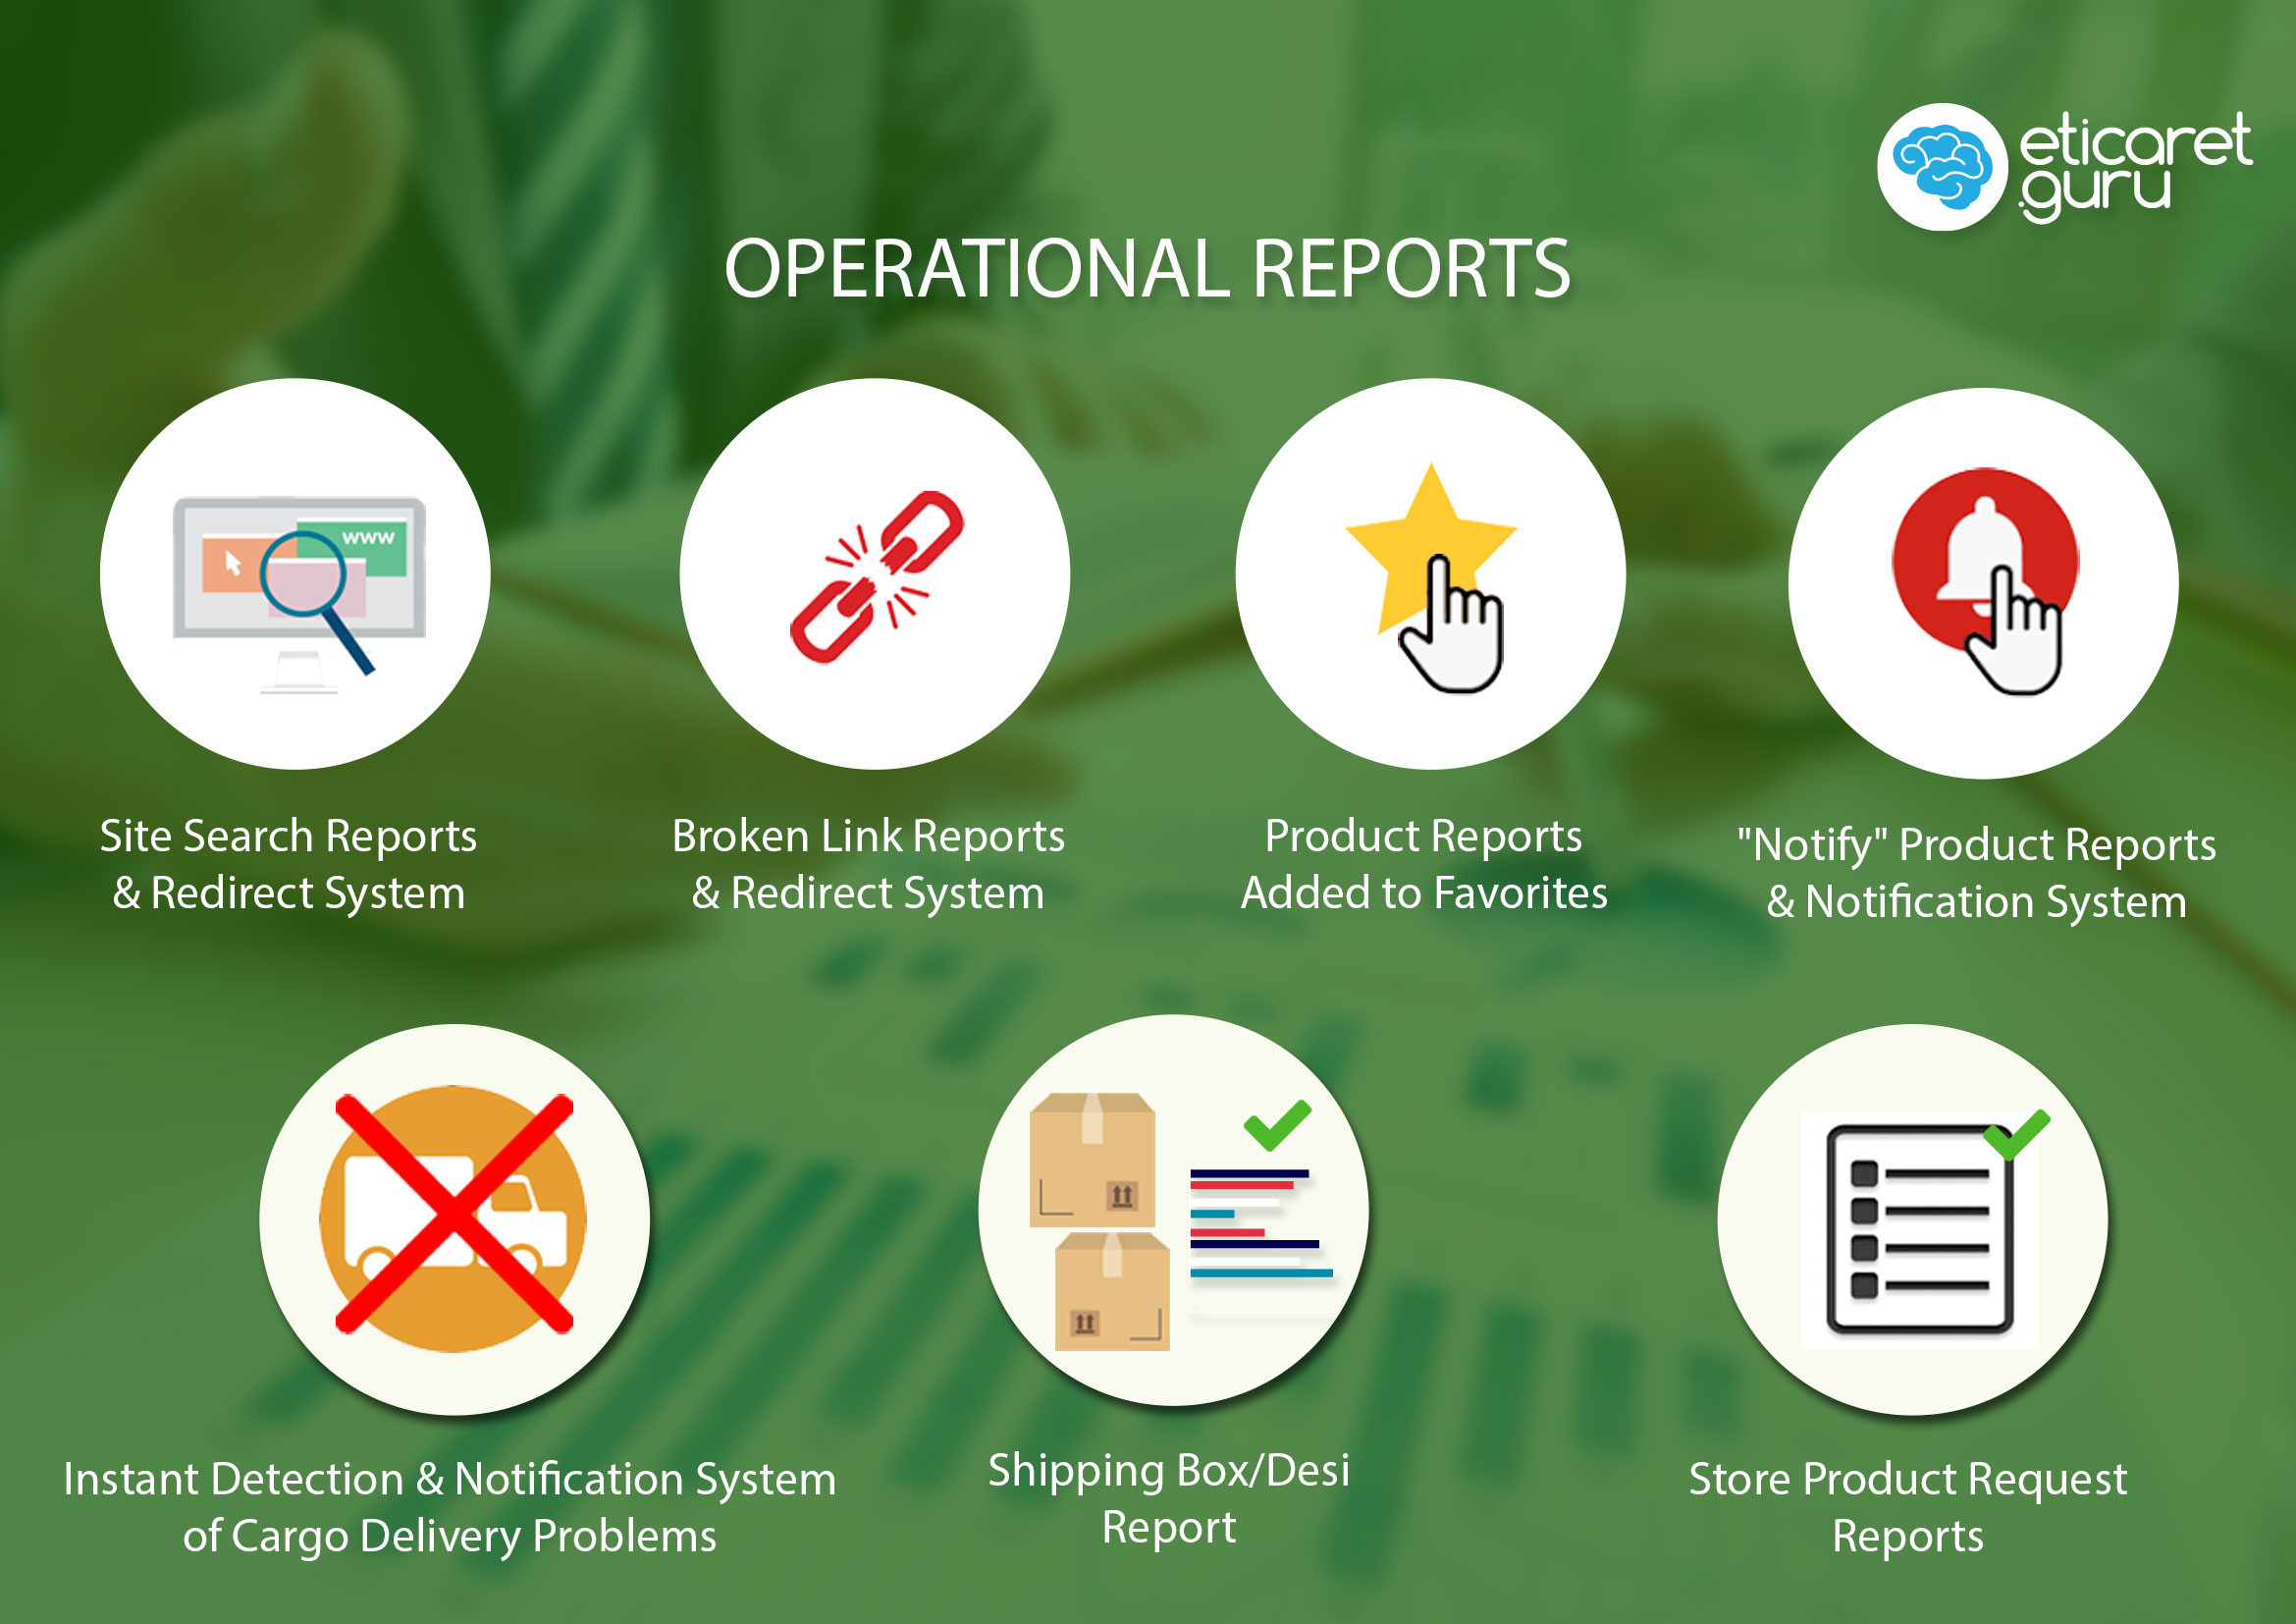 OPERATIONAL REPORTS